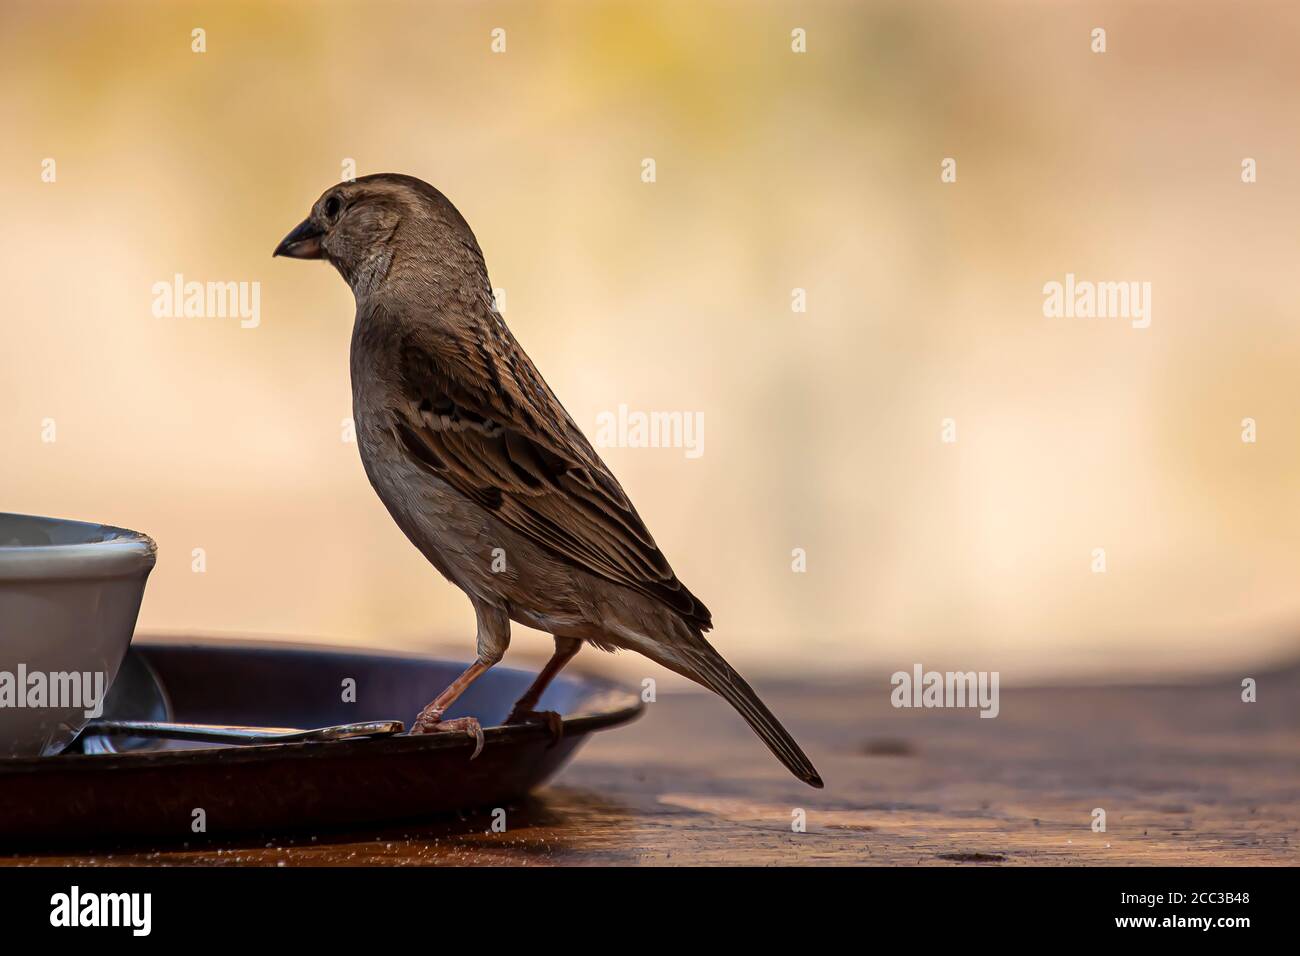 Close up isolated image of a wild sparrow landing on the rim of a breakfast plate on a wooden table. It came to scavenge over the crumbles on the plat Stock Photo